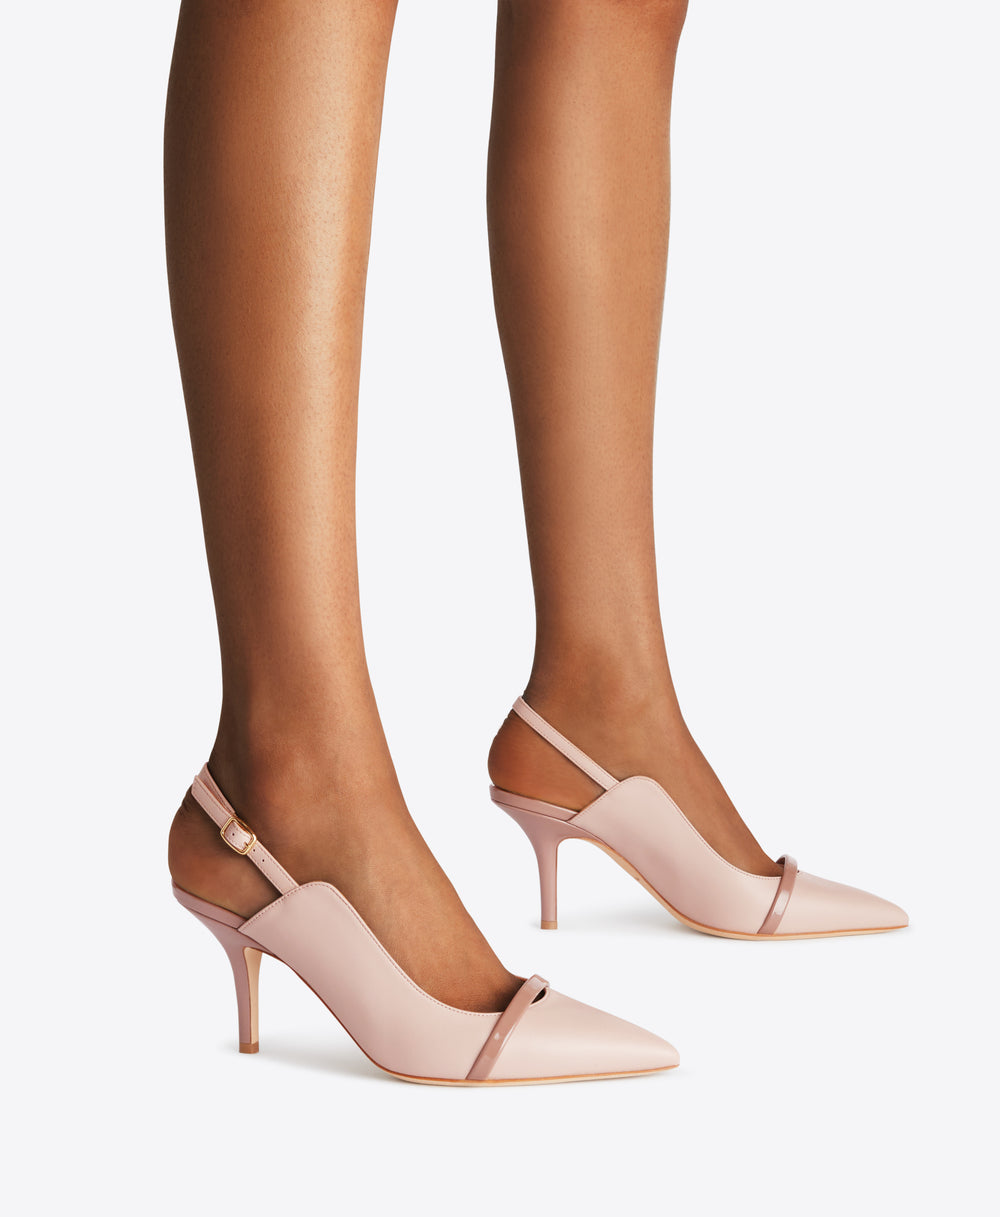 Women's Dusty Pink Leather and Brown Patent Slingback Pumps with Pointed Toe by Malone Souliers